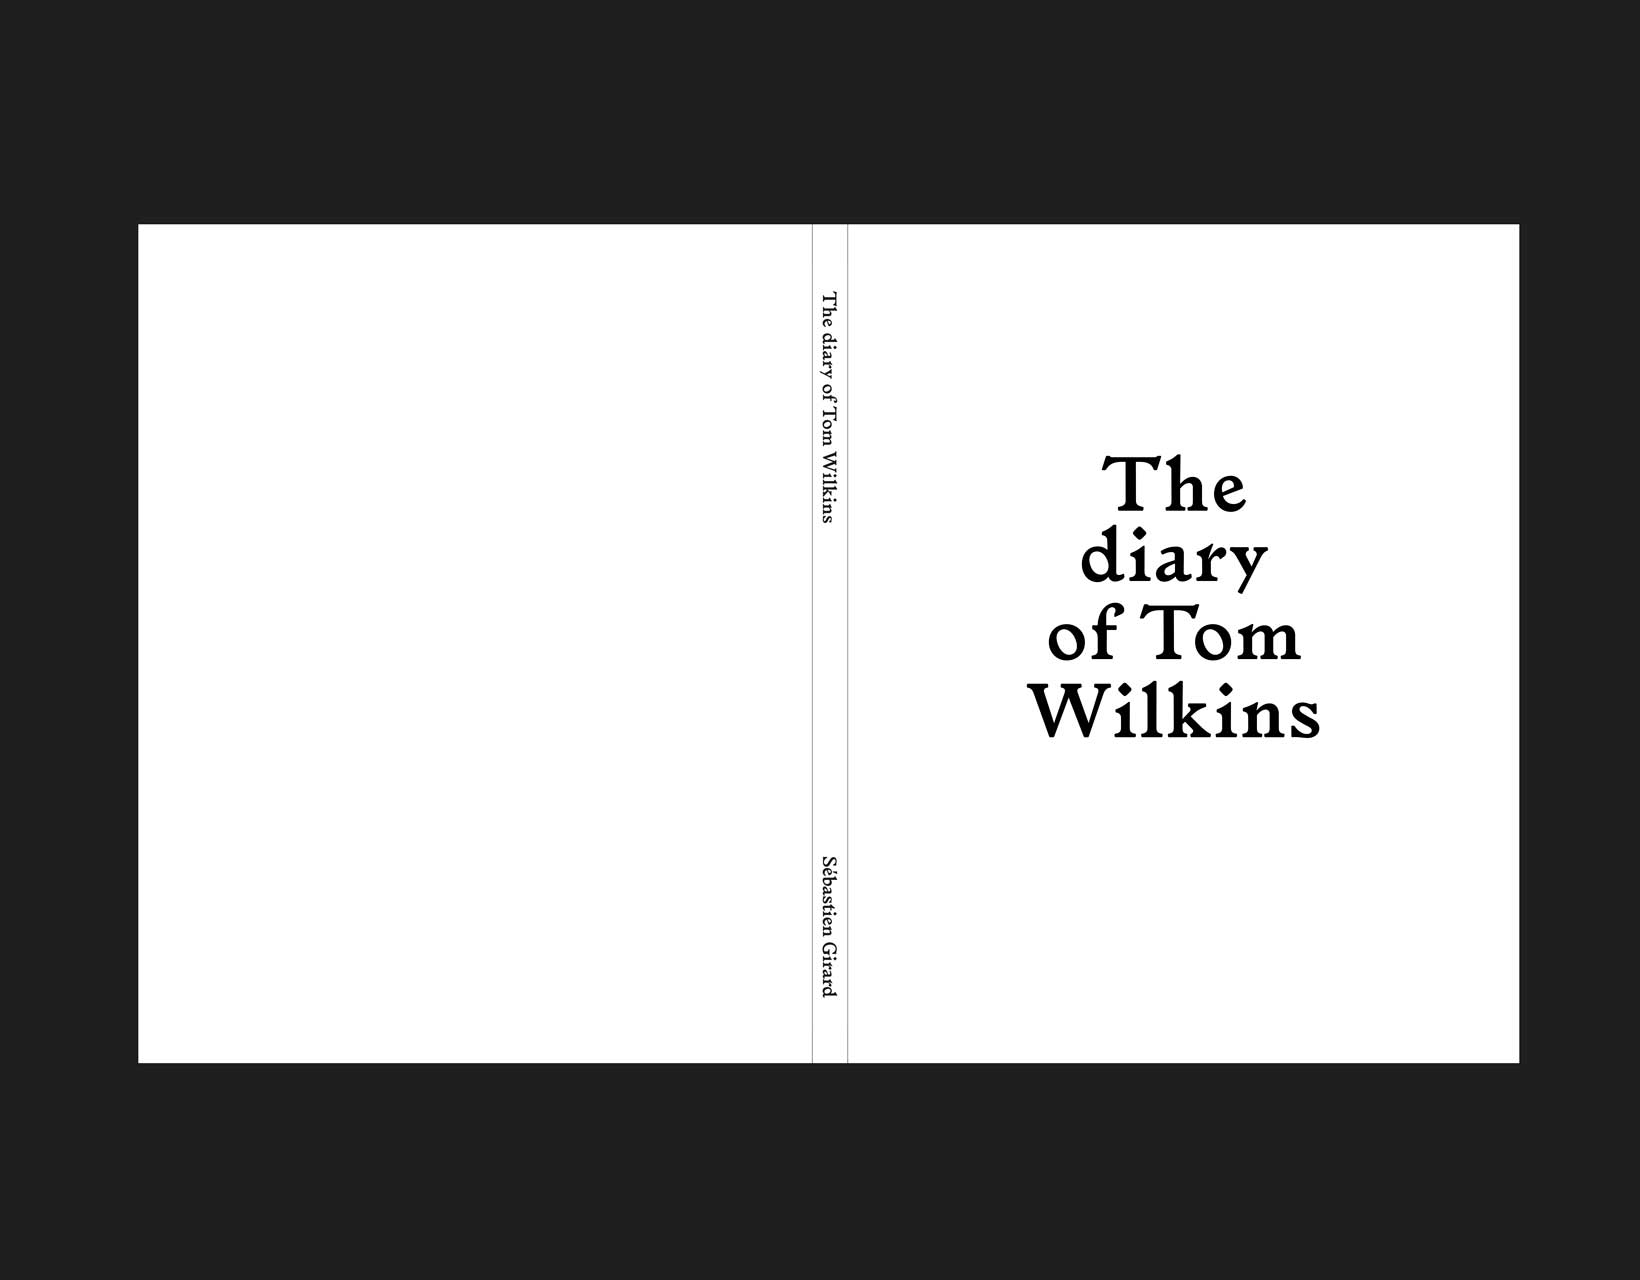 The diary of Tom Wilkins